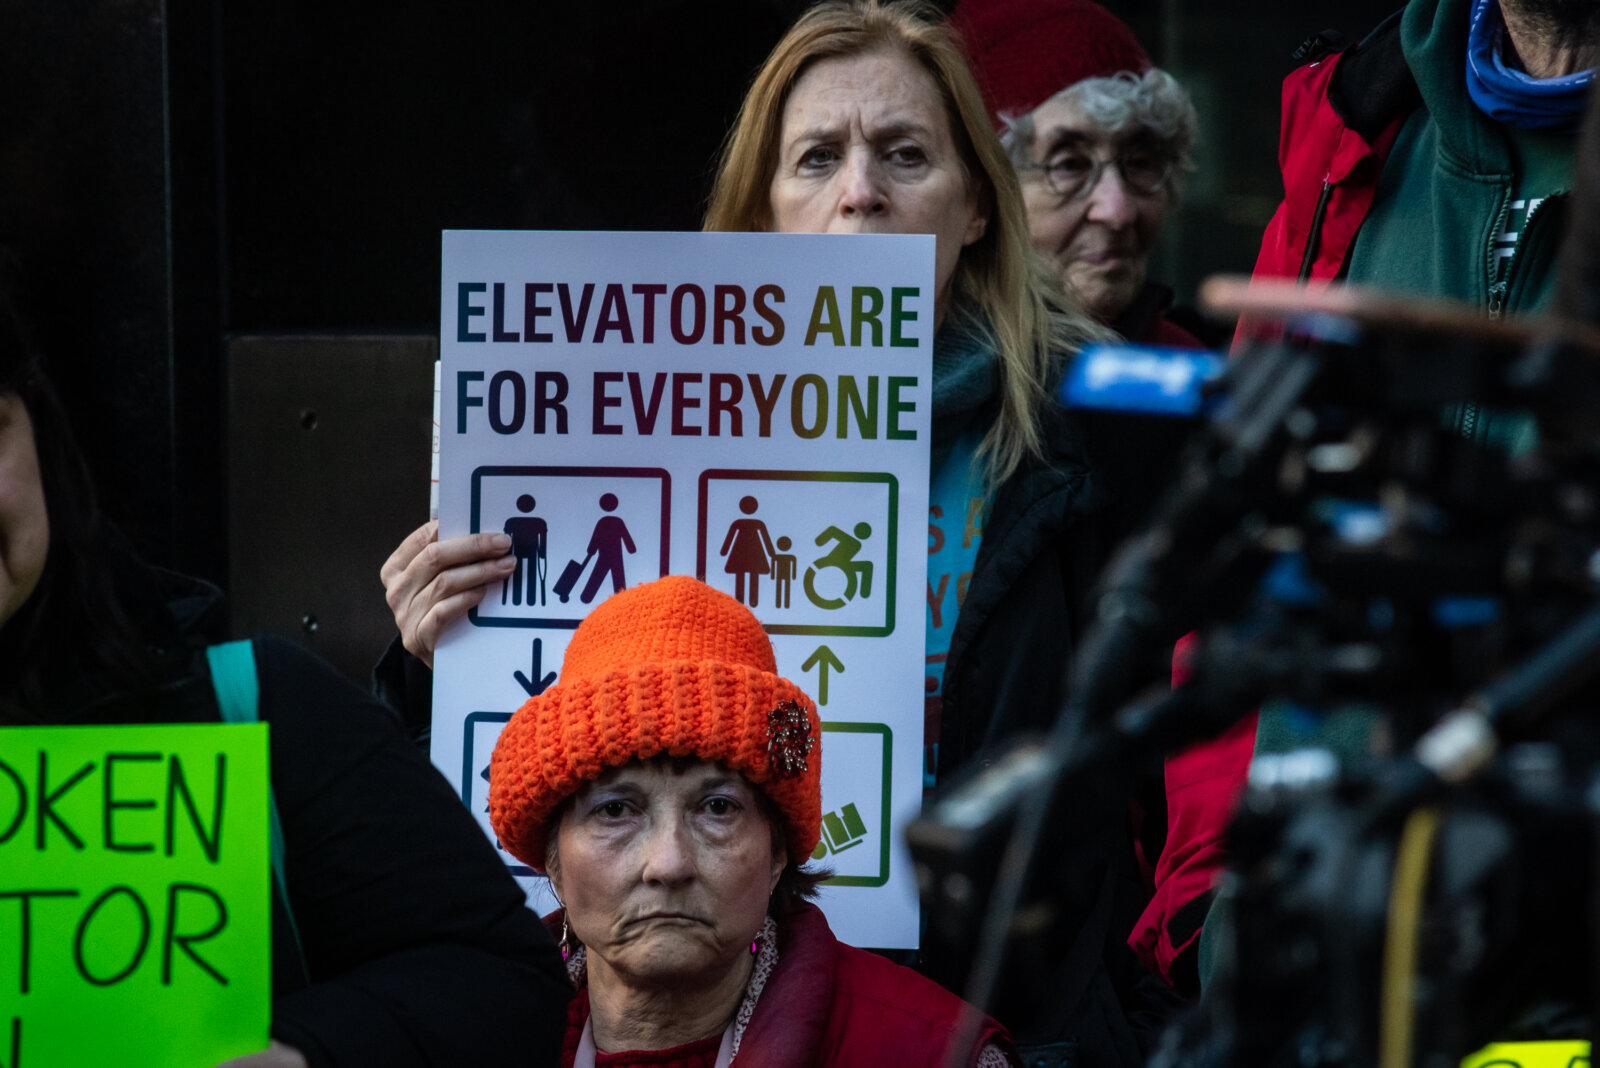 Fed Up With The Inconvenience Disability Advocates Demand Reliable Elevators At Subway Stations 3586